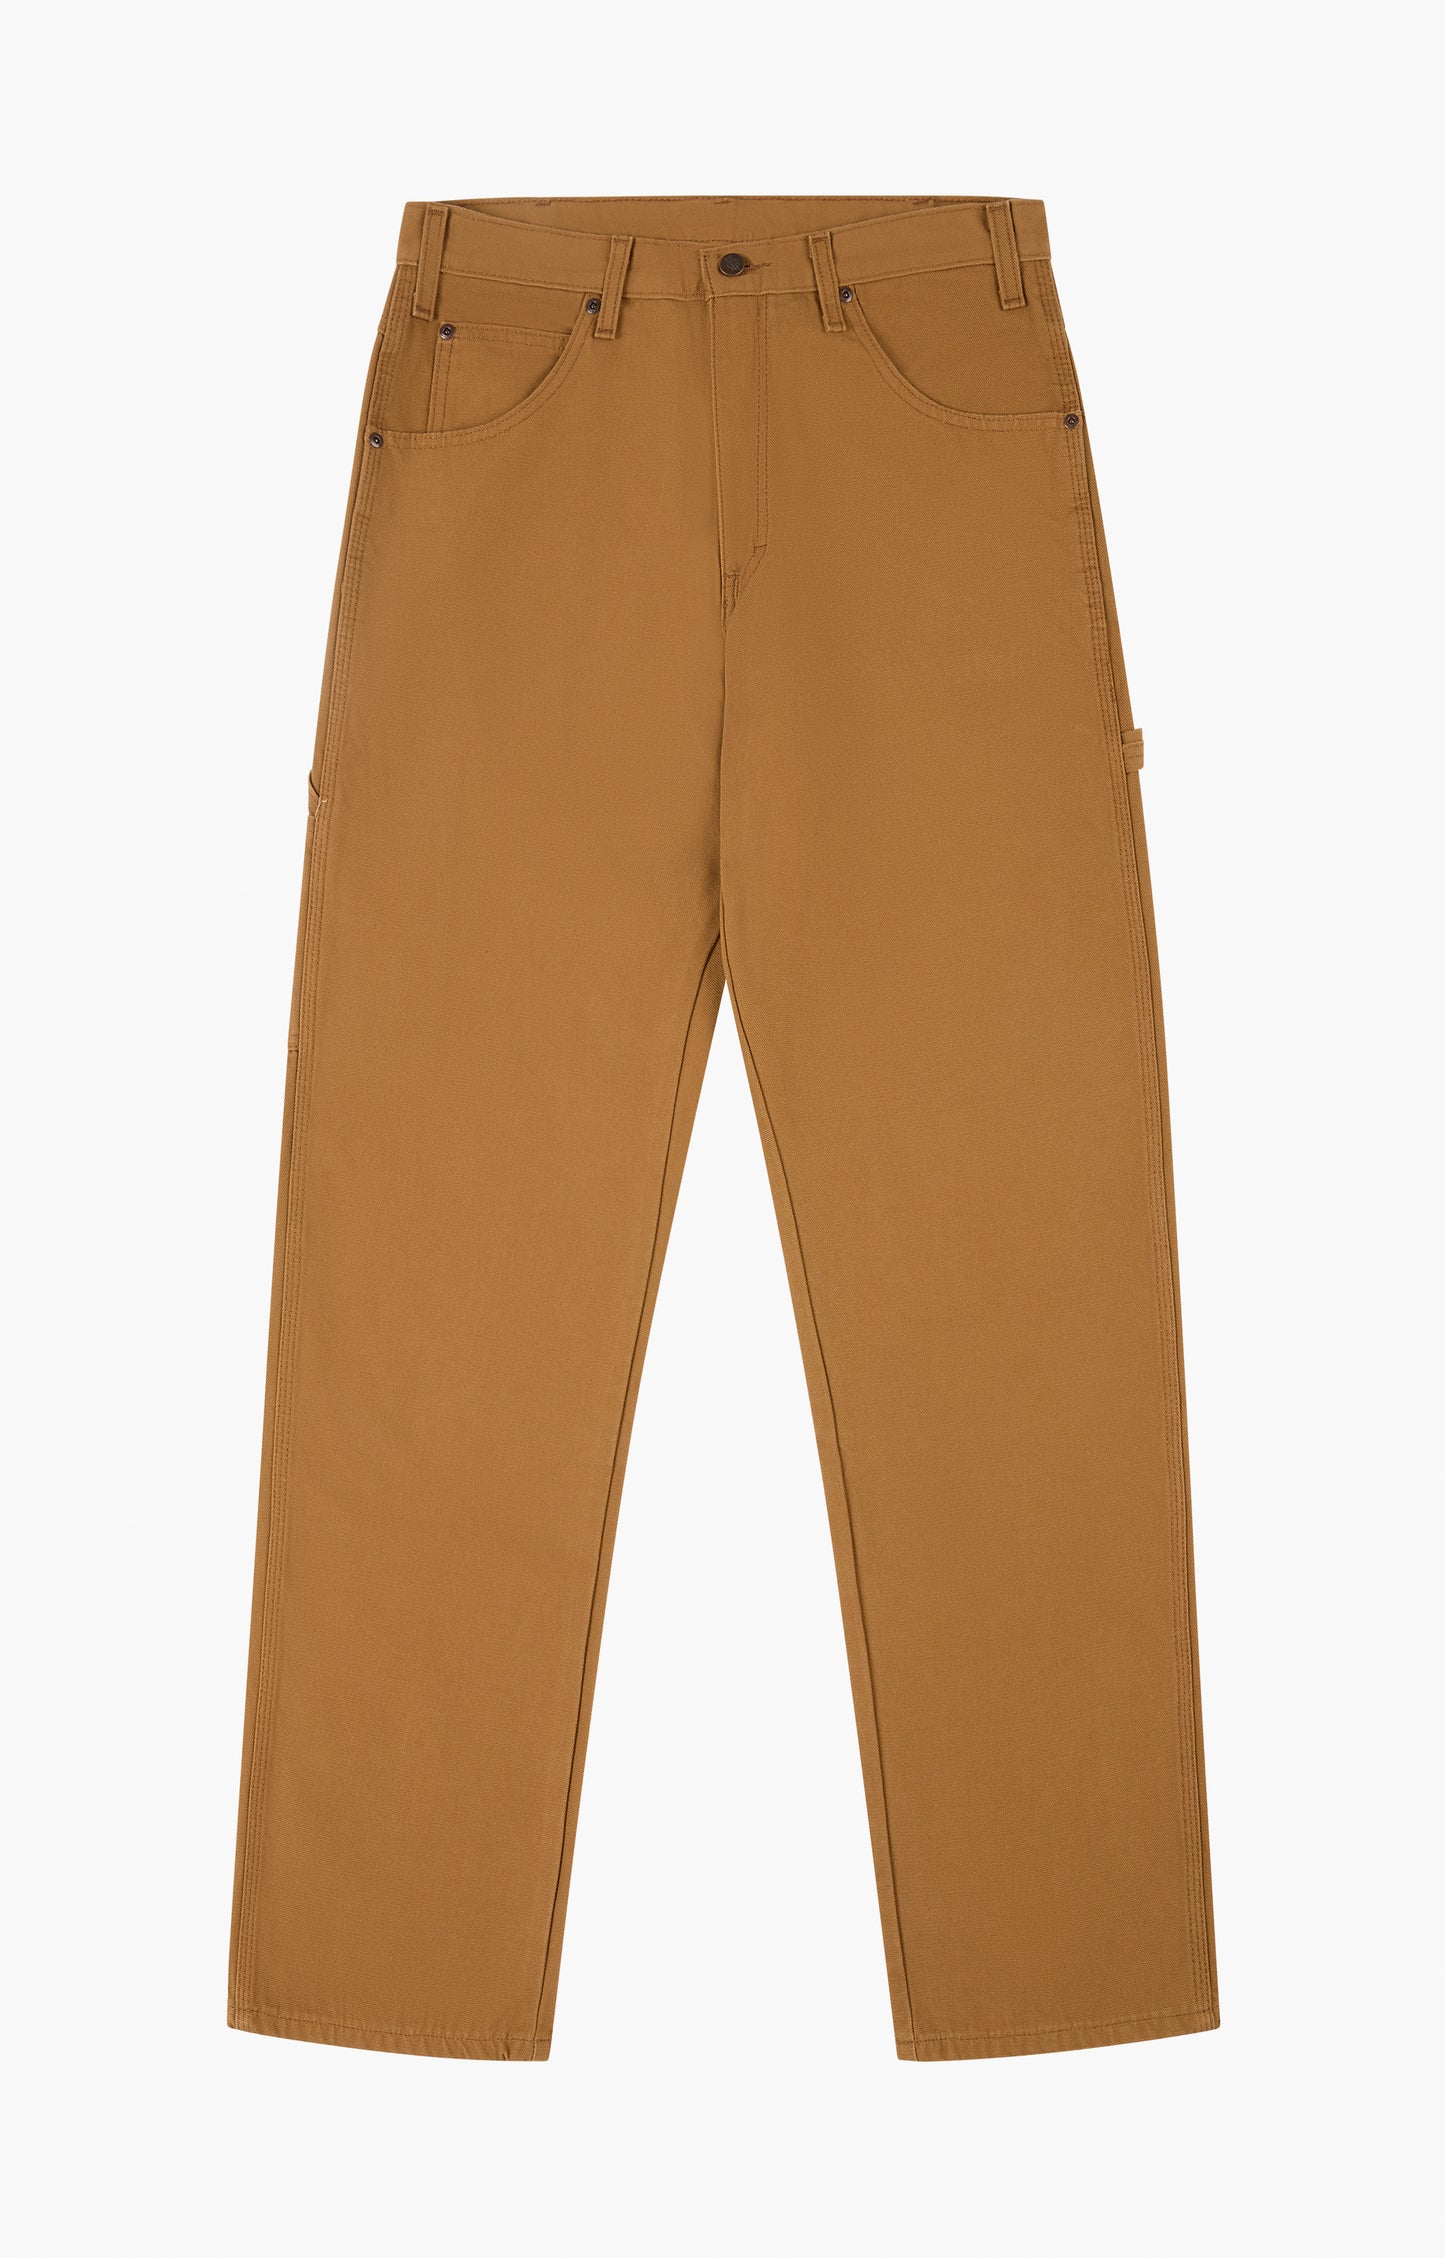 Dickies Relaxed Fit Carpenter Duck Jeans, Rinsed Brown Duck